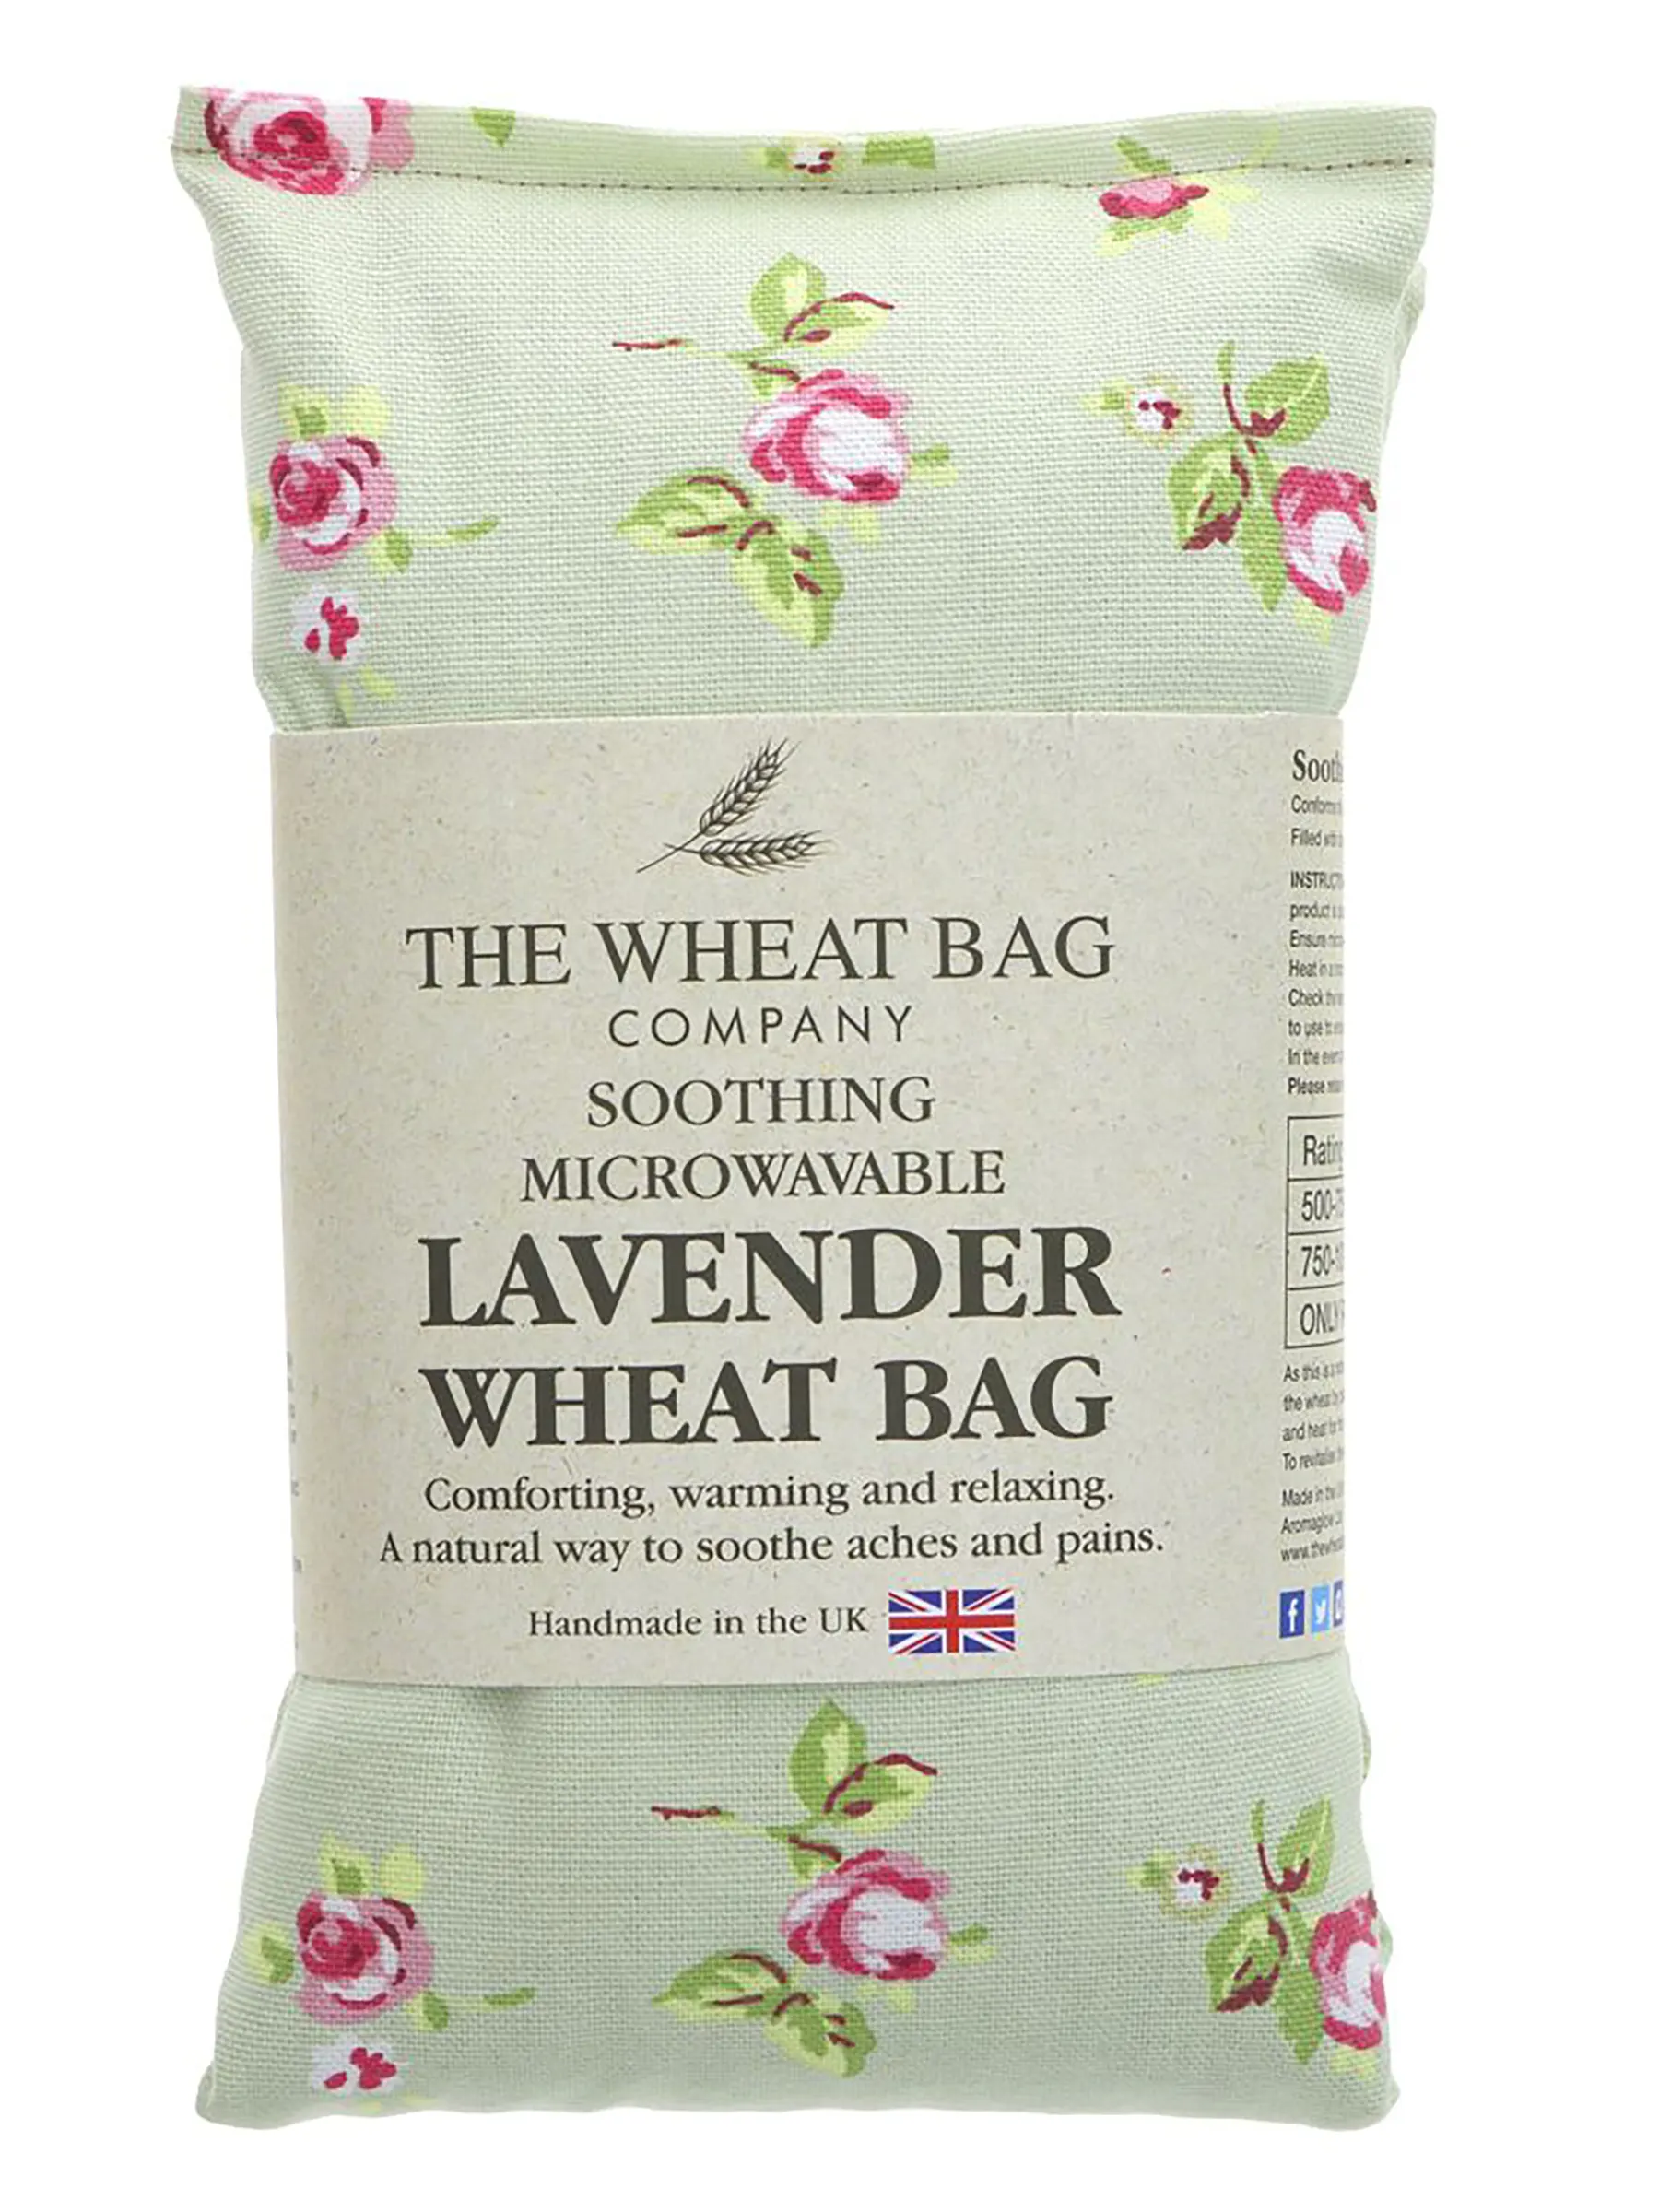 Soothing Microwaveable Lavender Wheat Bag